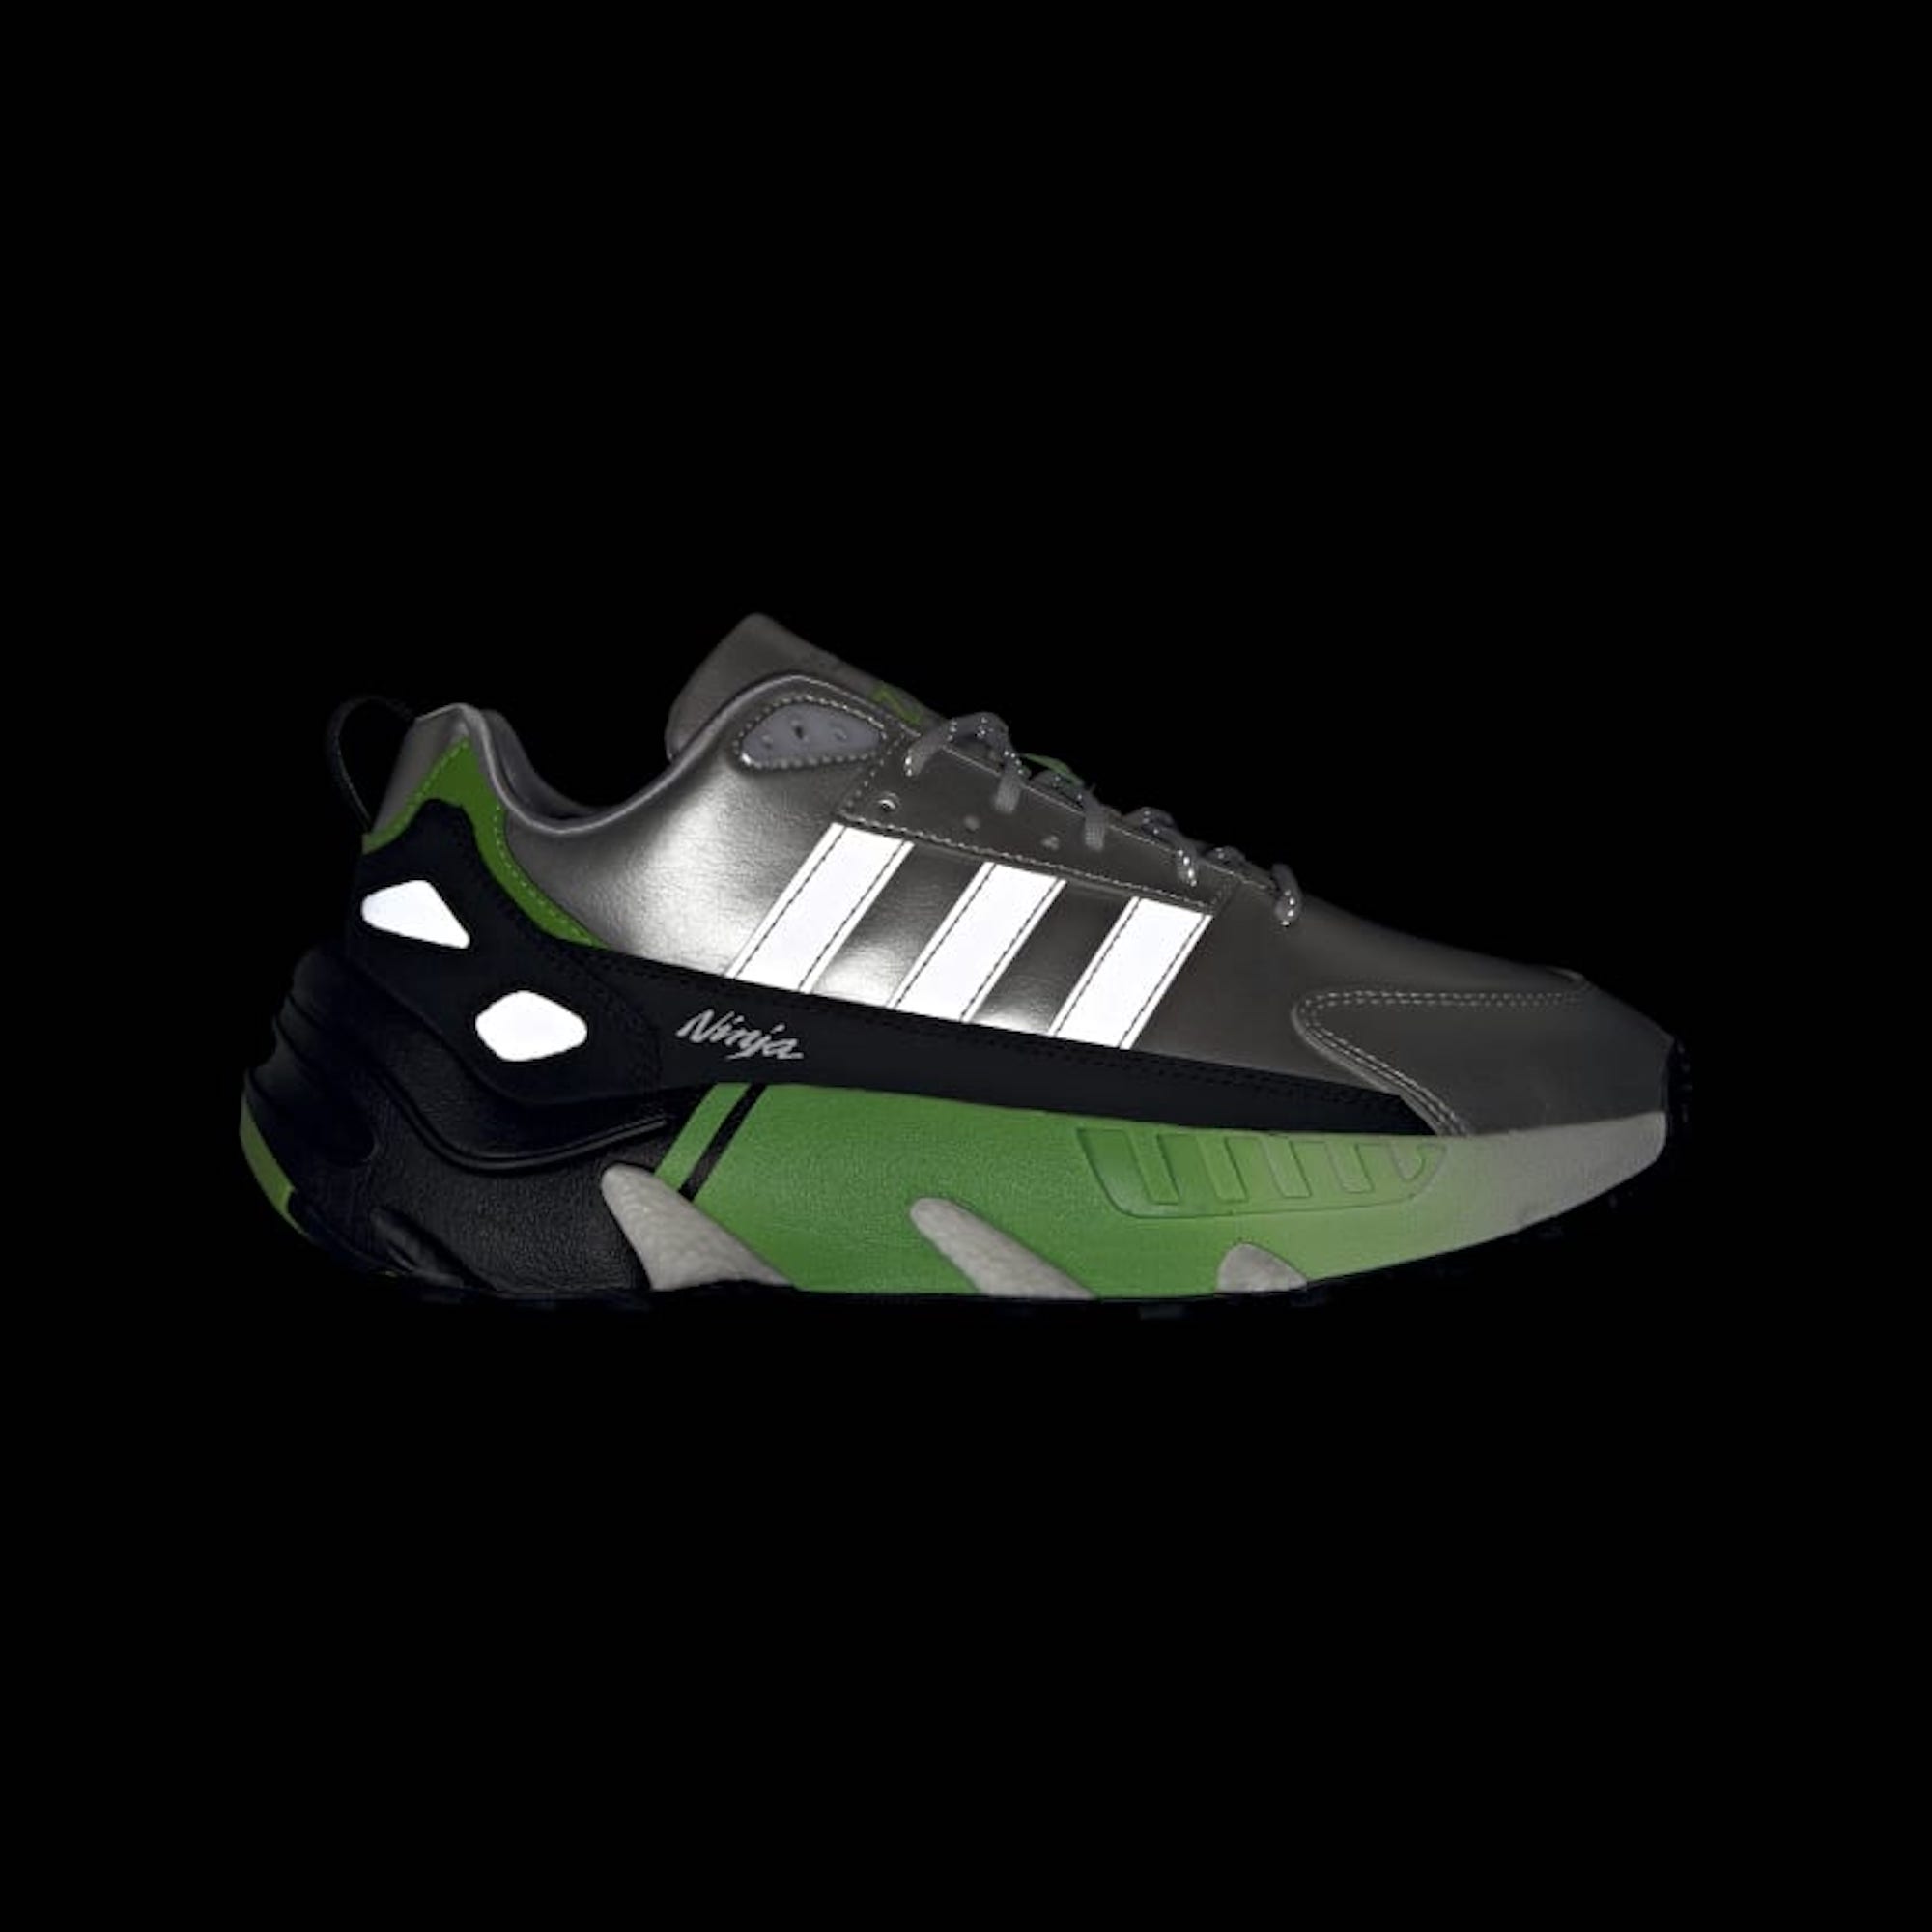 Kawasaki's newest addition to their partnership with Adidas: The ZX22. Media sourced from Kawasaki's press release.